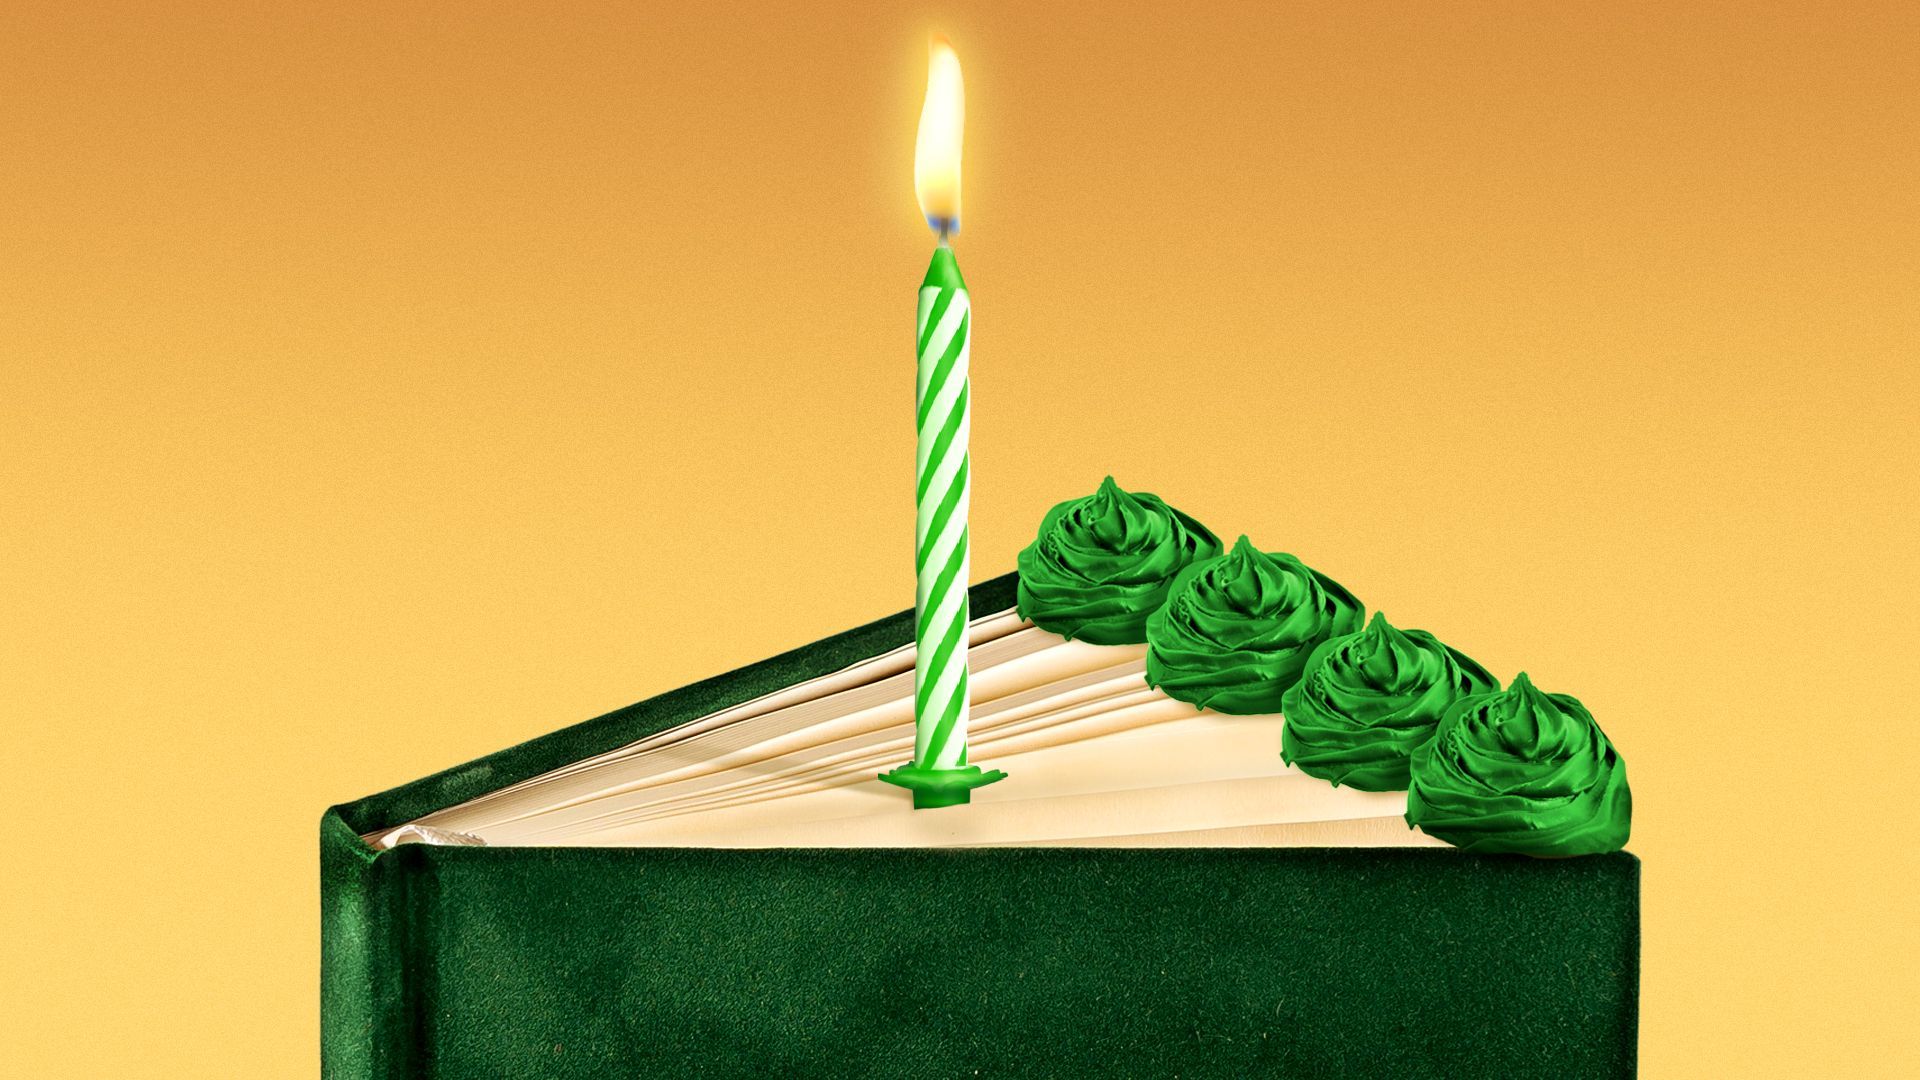 Illustration of a book with frosting and a lit birthday candle.